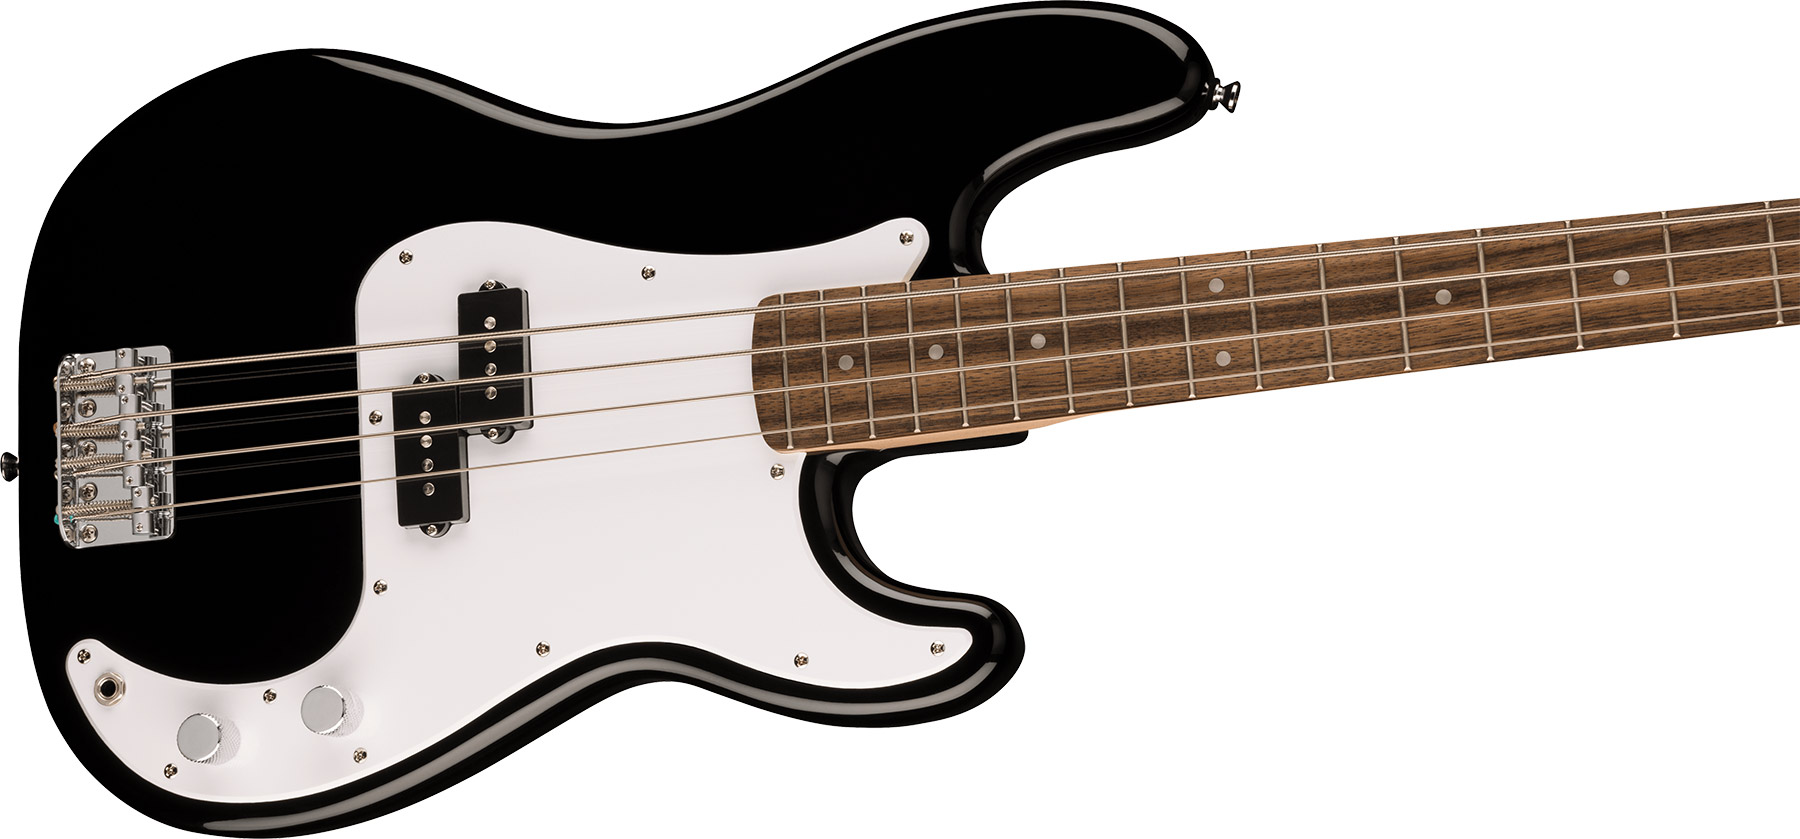 Squier Precision Bass Sonic Lau - Black - Solid body electric bass - Variation 2